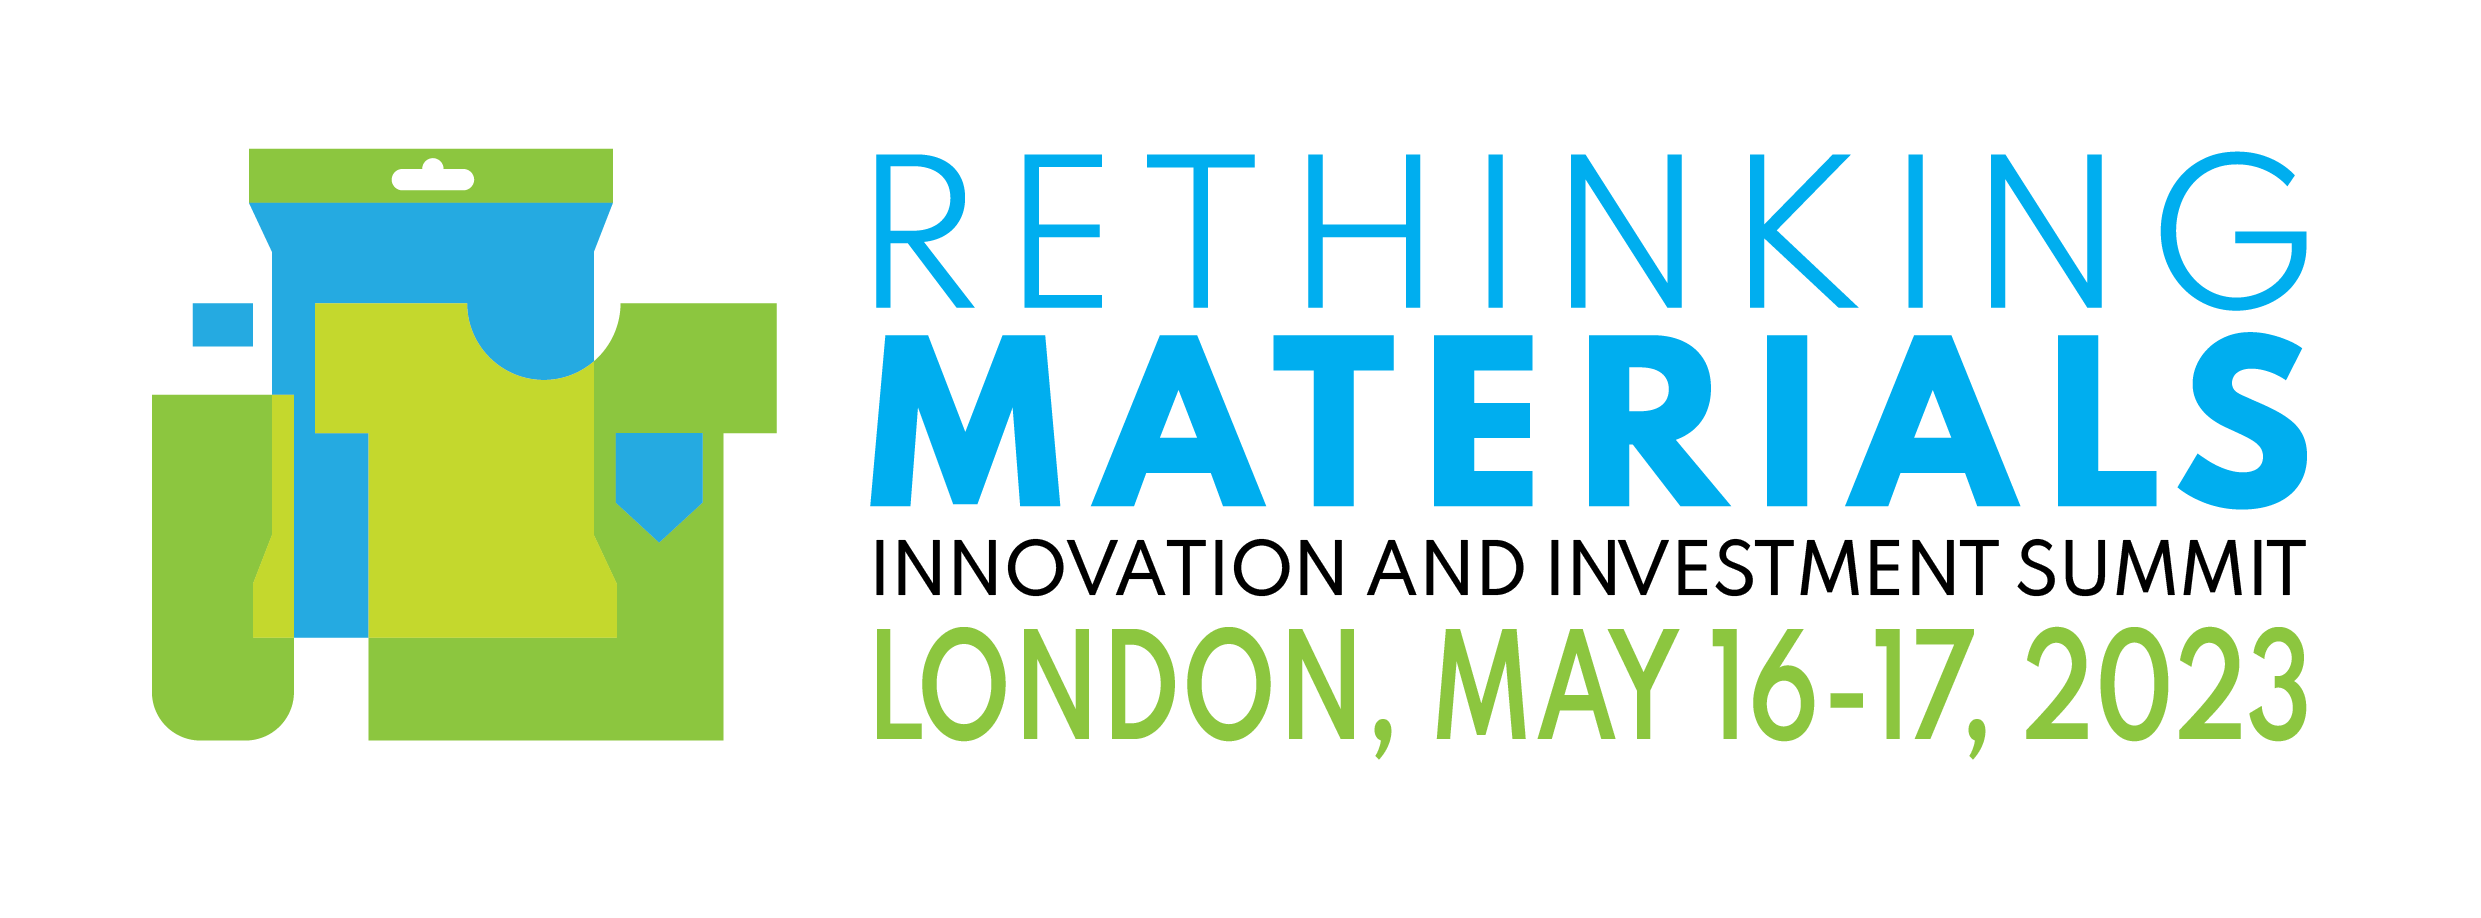 Save the Date for Rethinking Materials May